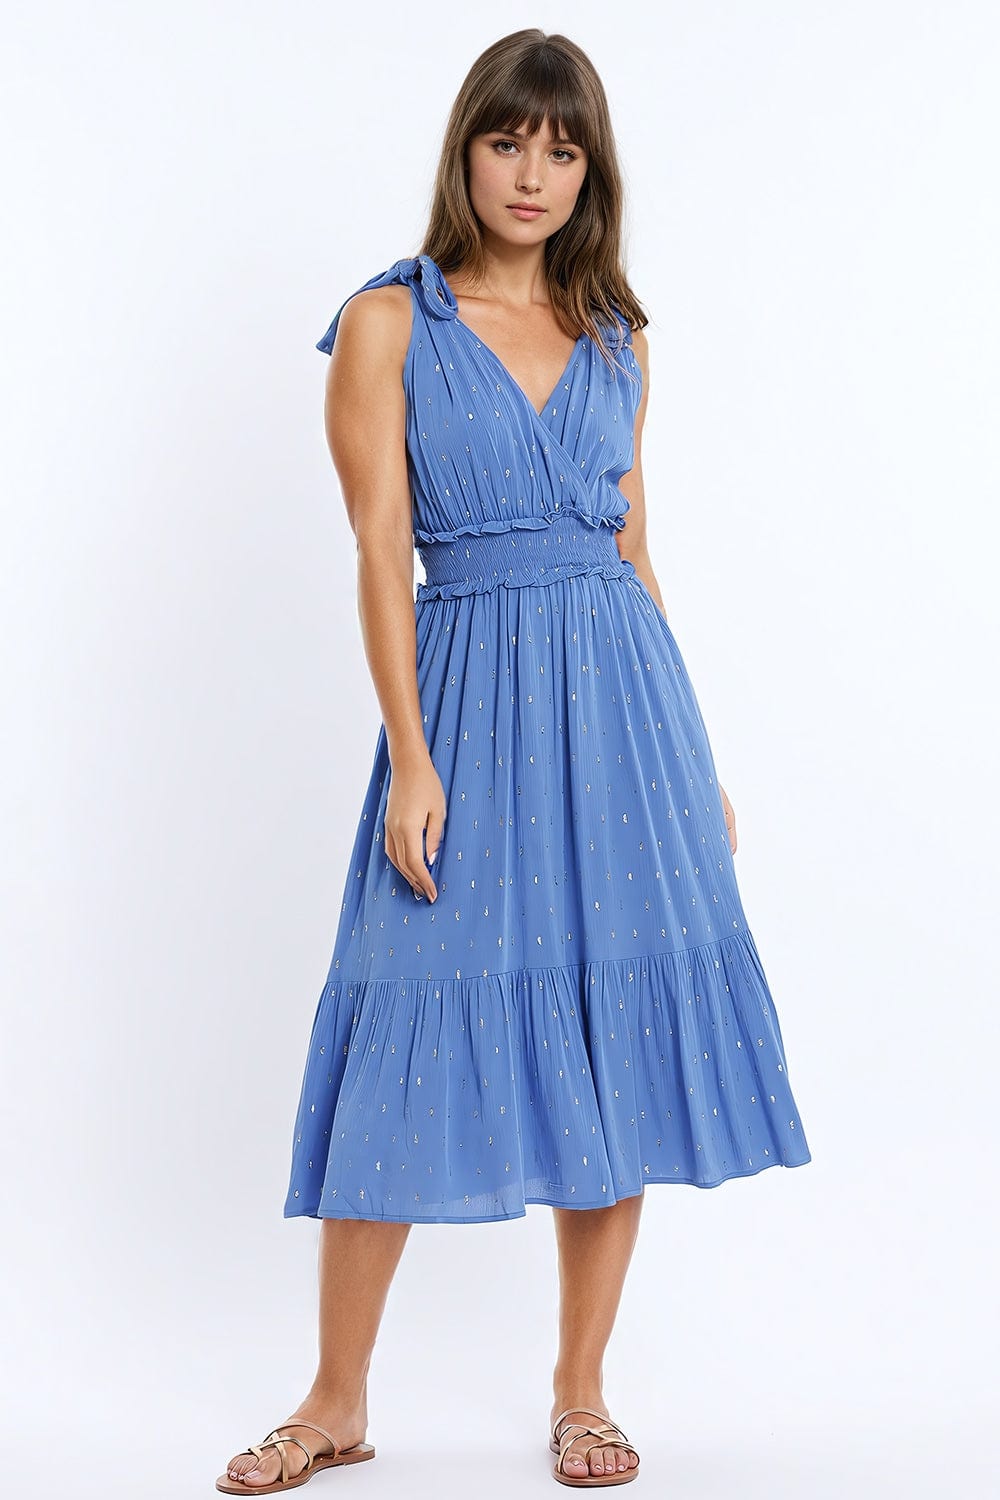 Q2 Women's Dress Wrapped Blue Midi Dress With Smock Detail At The Waist And Golden Polka Dots